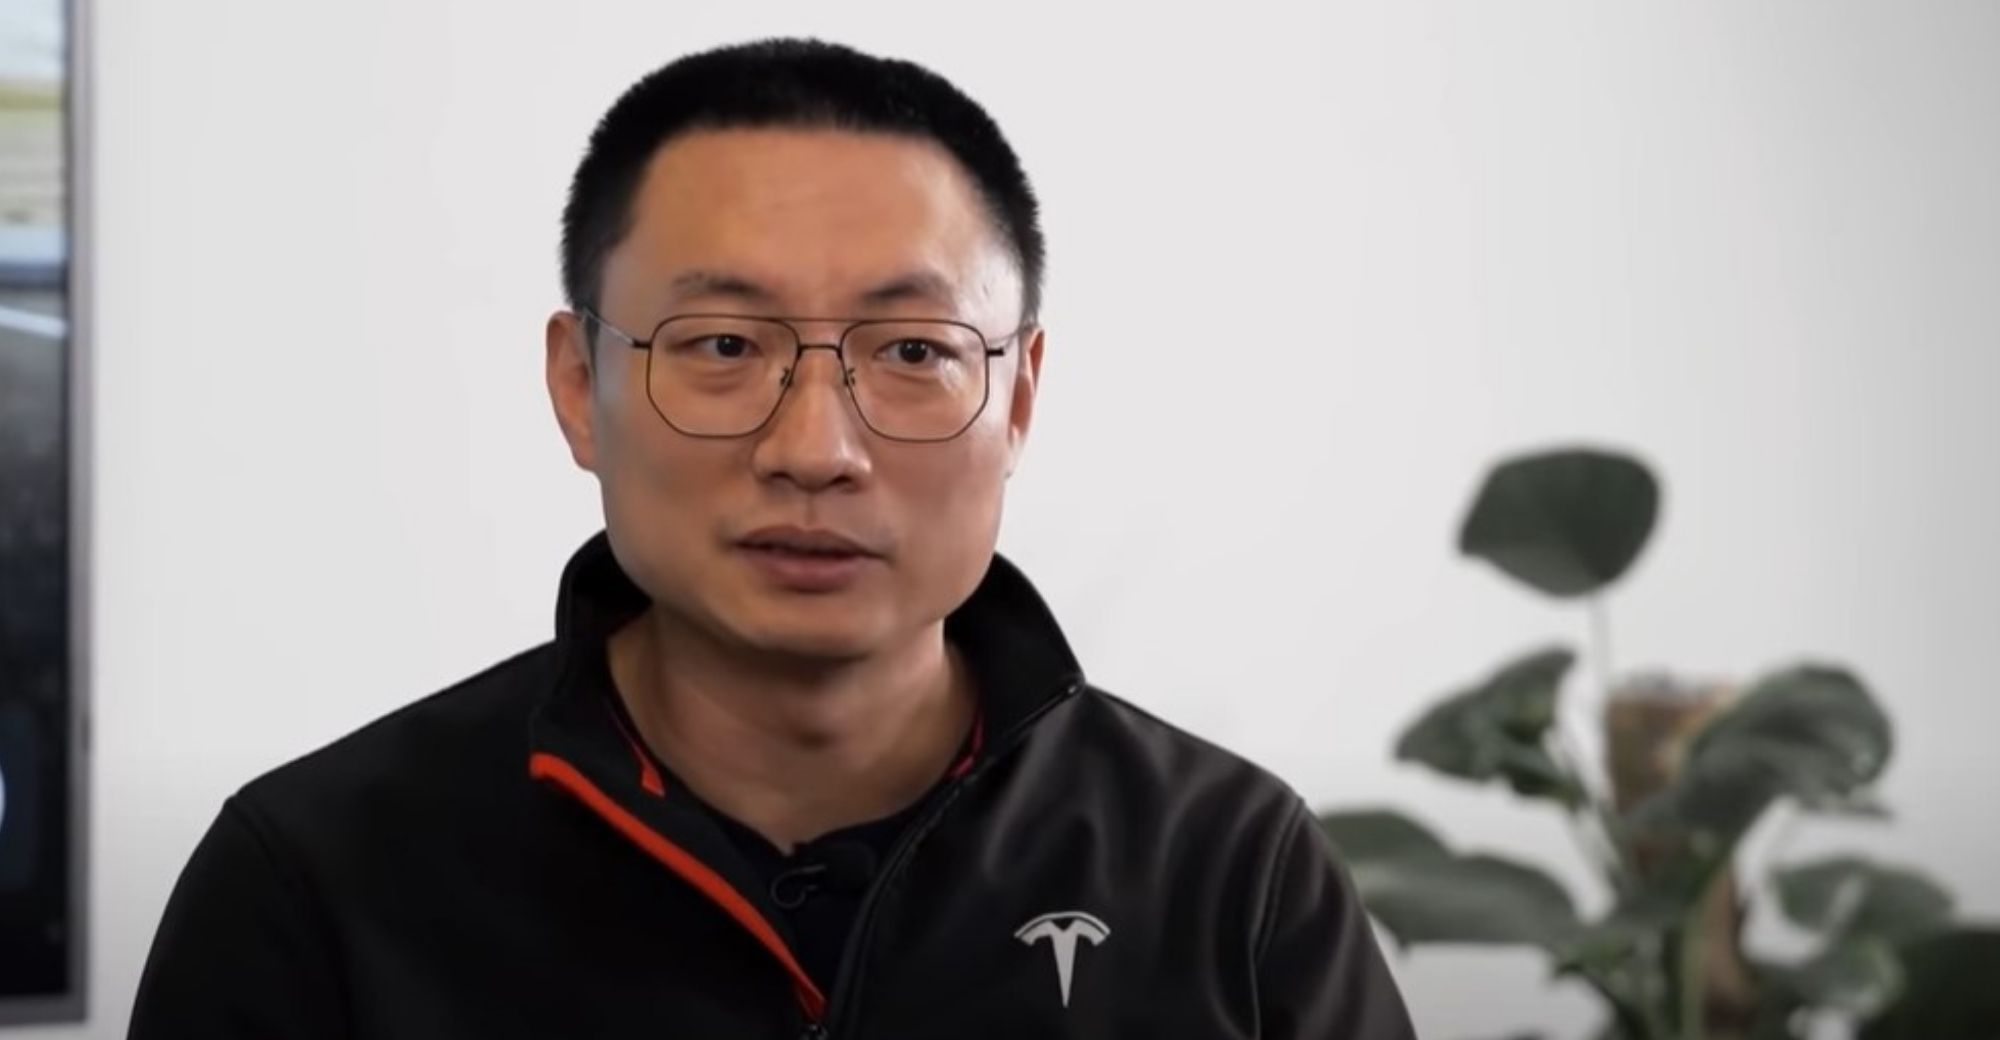 Tom Zhu to Run Tesla’s Global Sales, Delivery, Services and Production, Reports Say